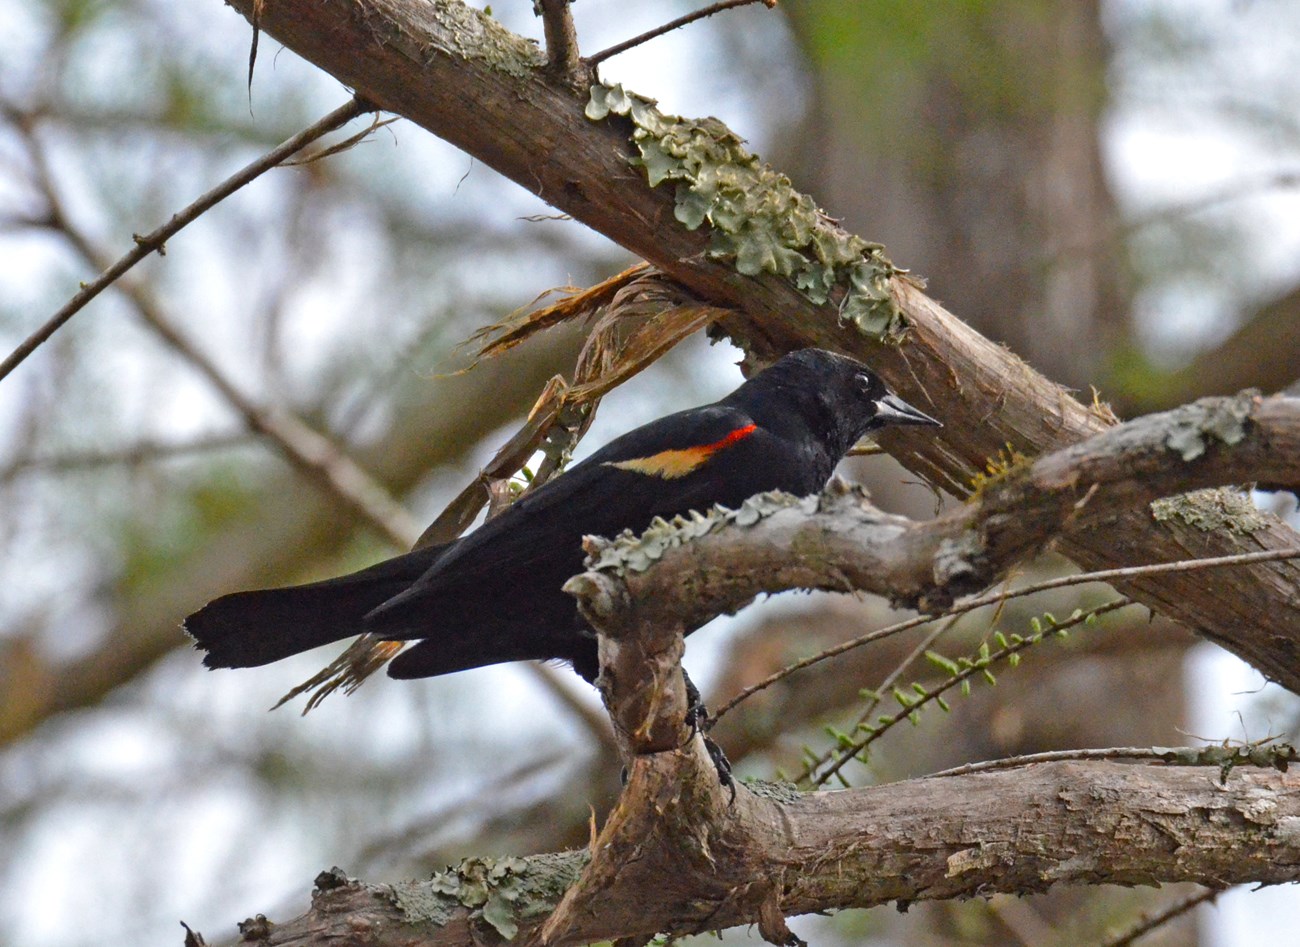 Red-winged blackbird perched in a tree